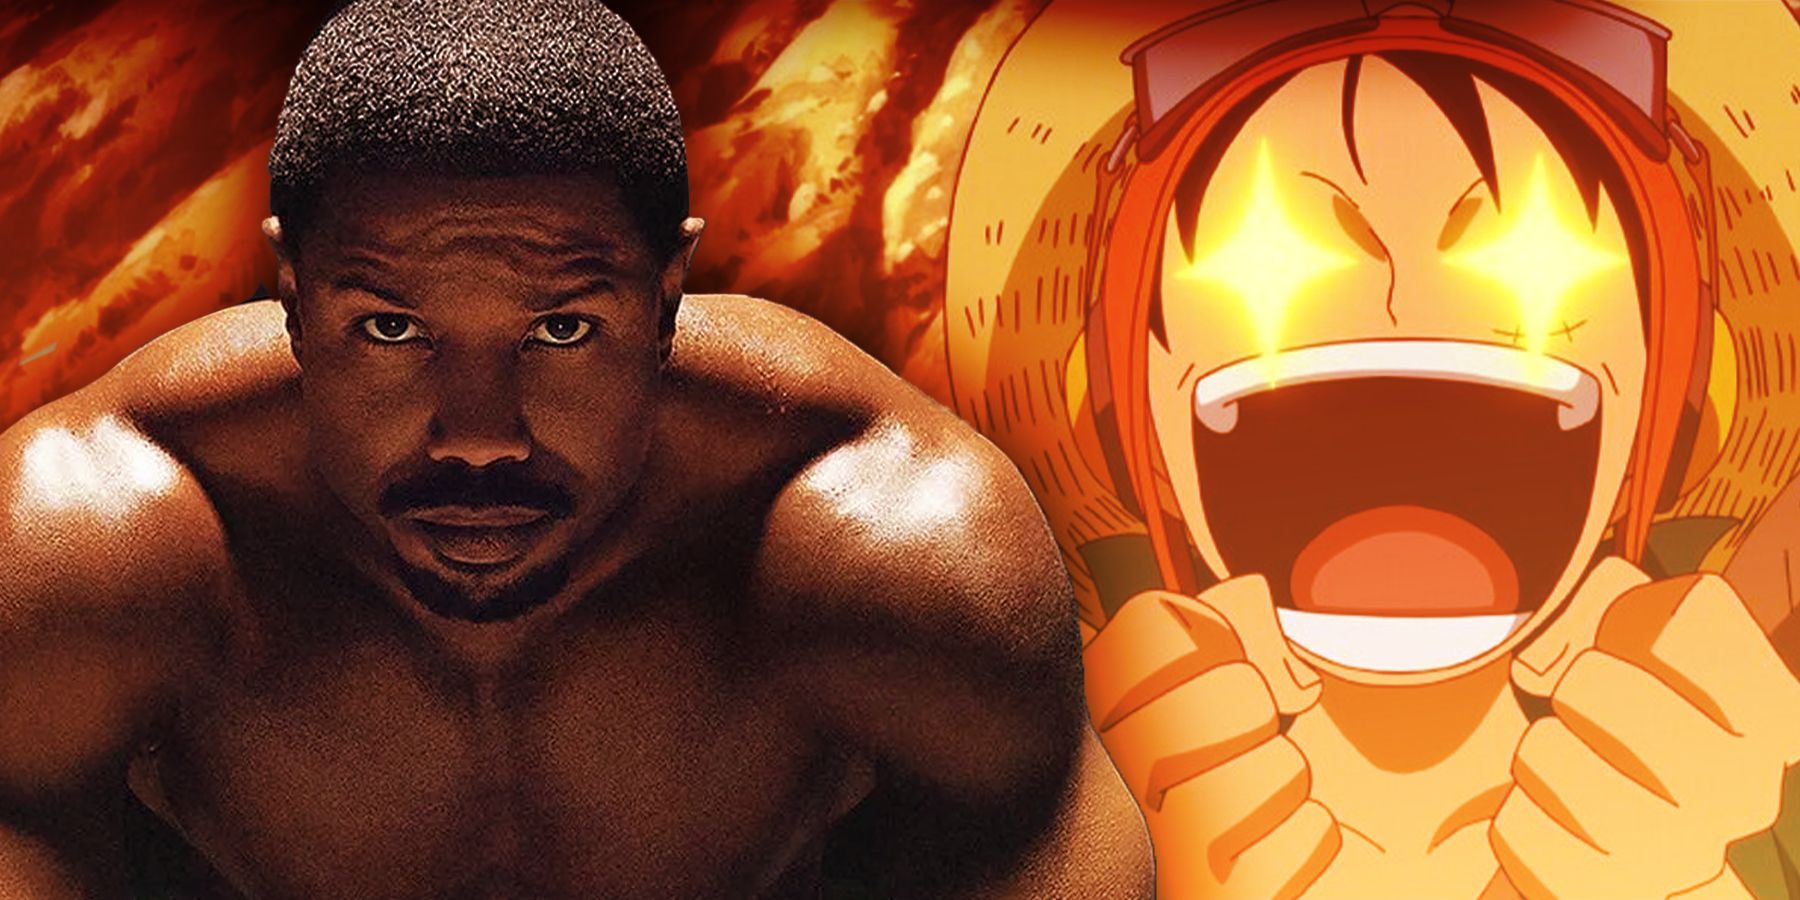 Michael B. Jordan's Creed-Verse Will Expand With an Anime Series